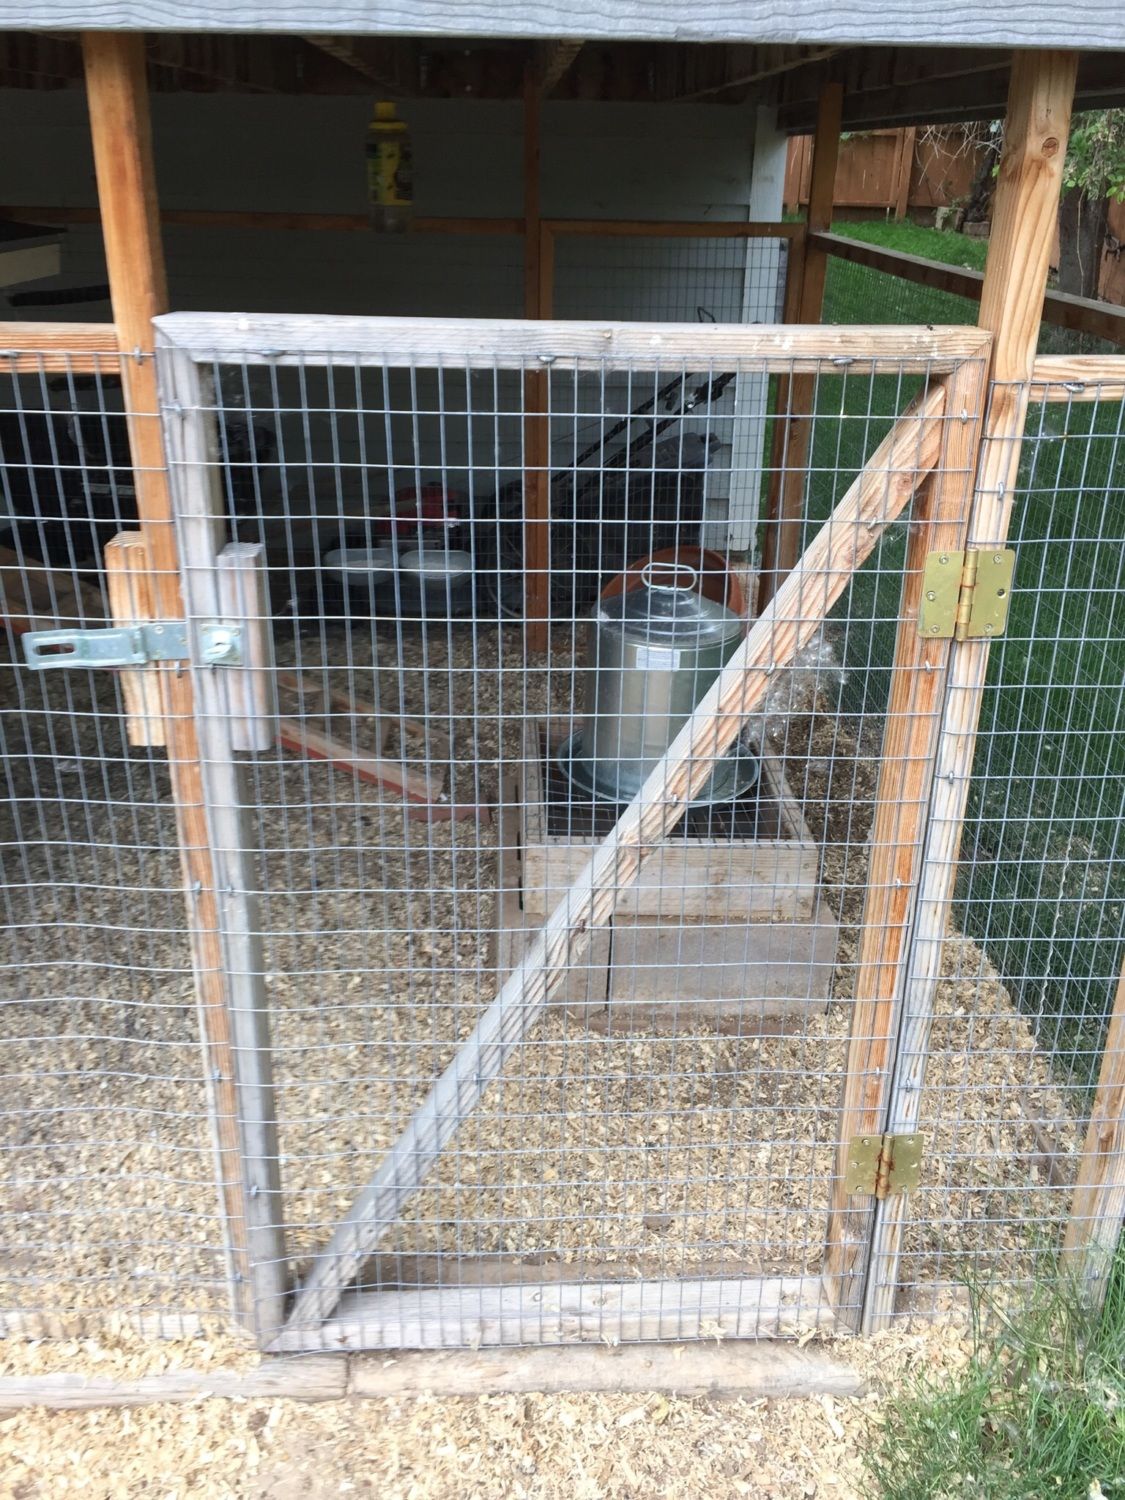 door for run made of 2x4's | BackYard Chickens - Learn How to Raise Chickens